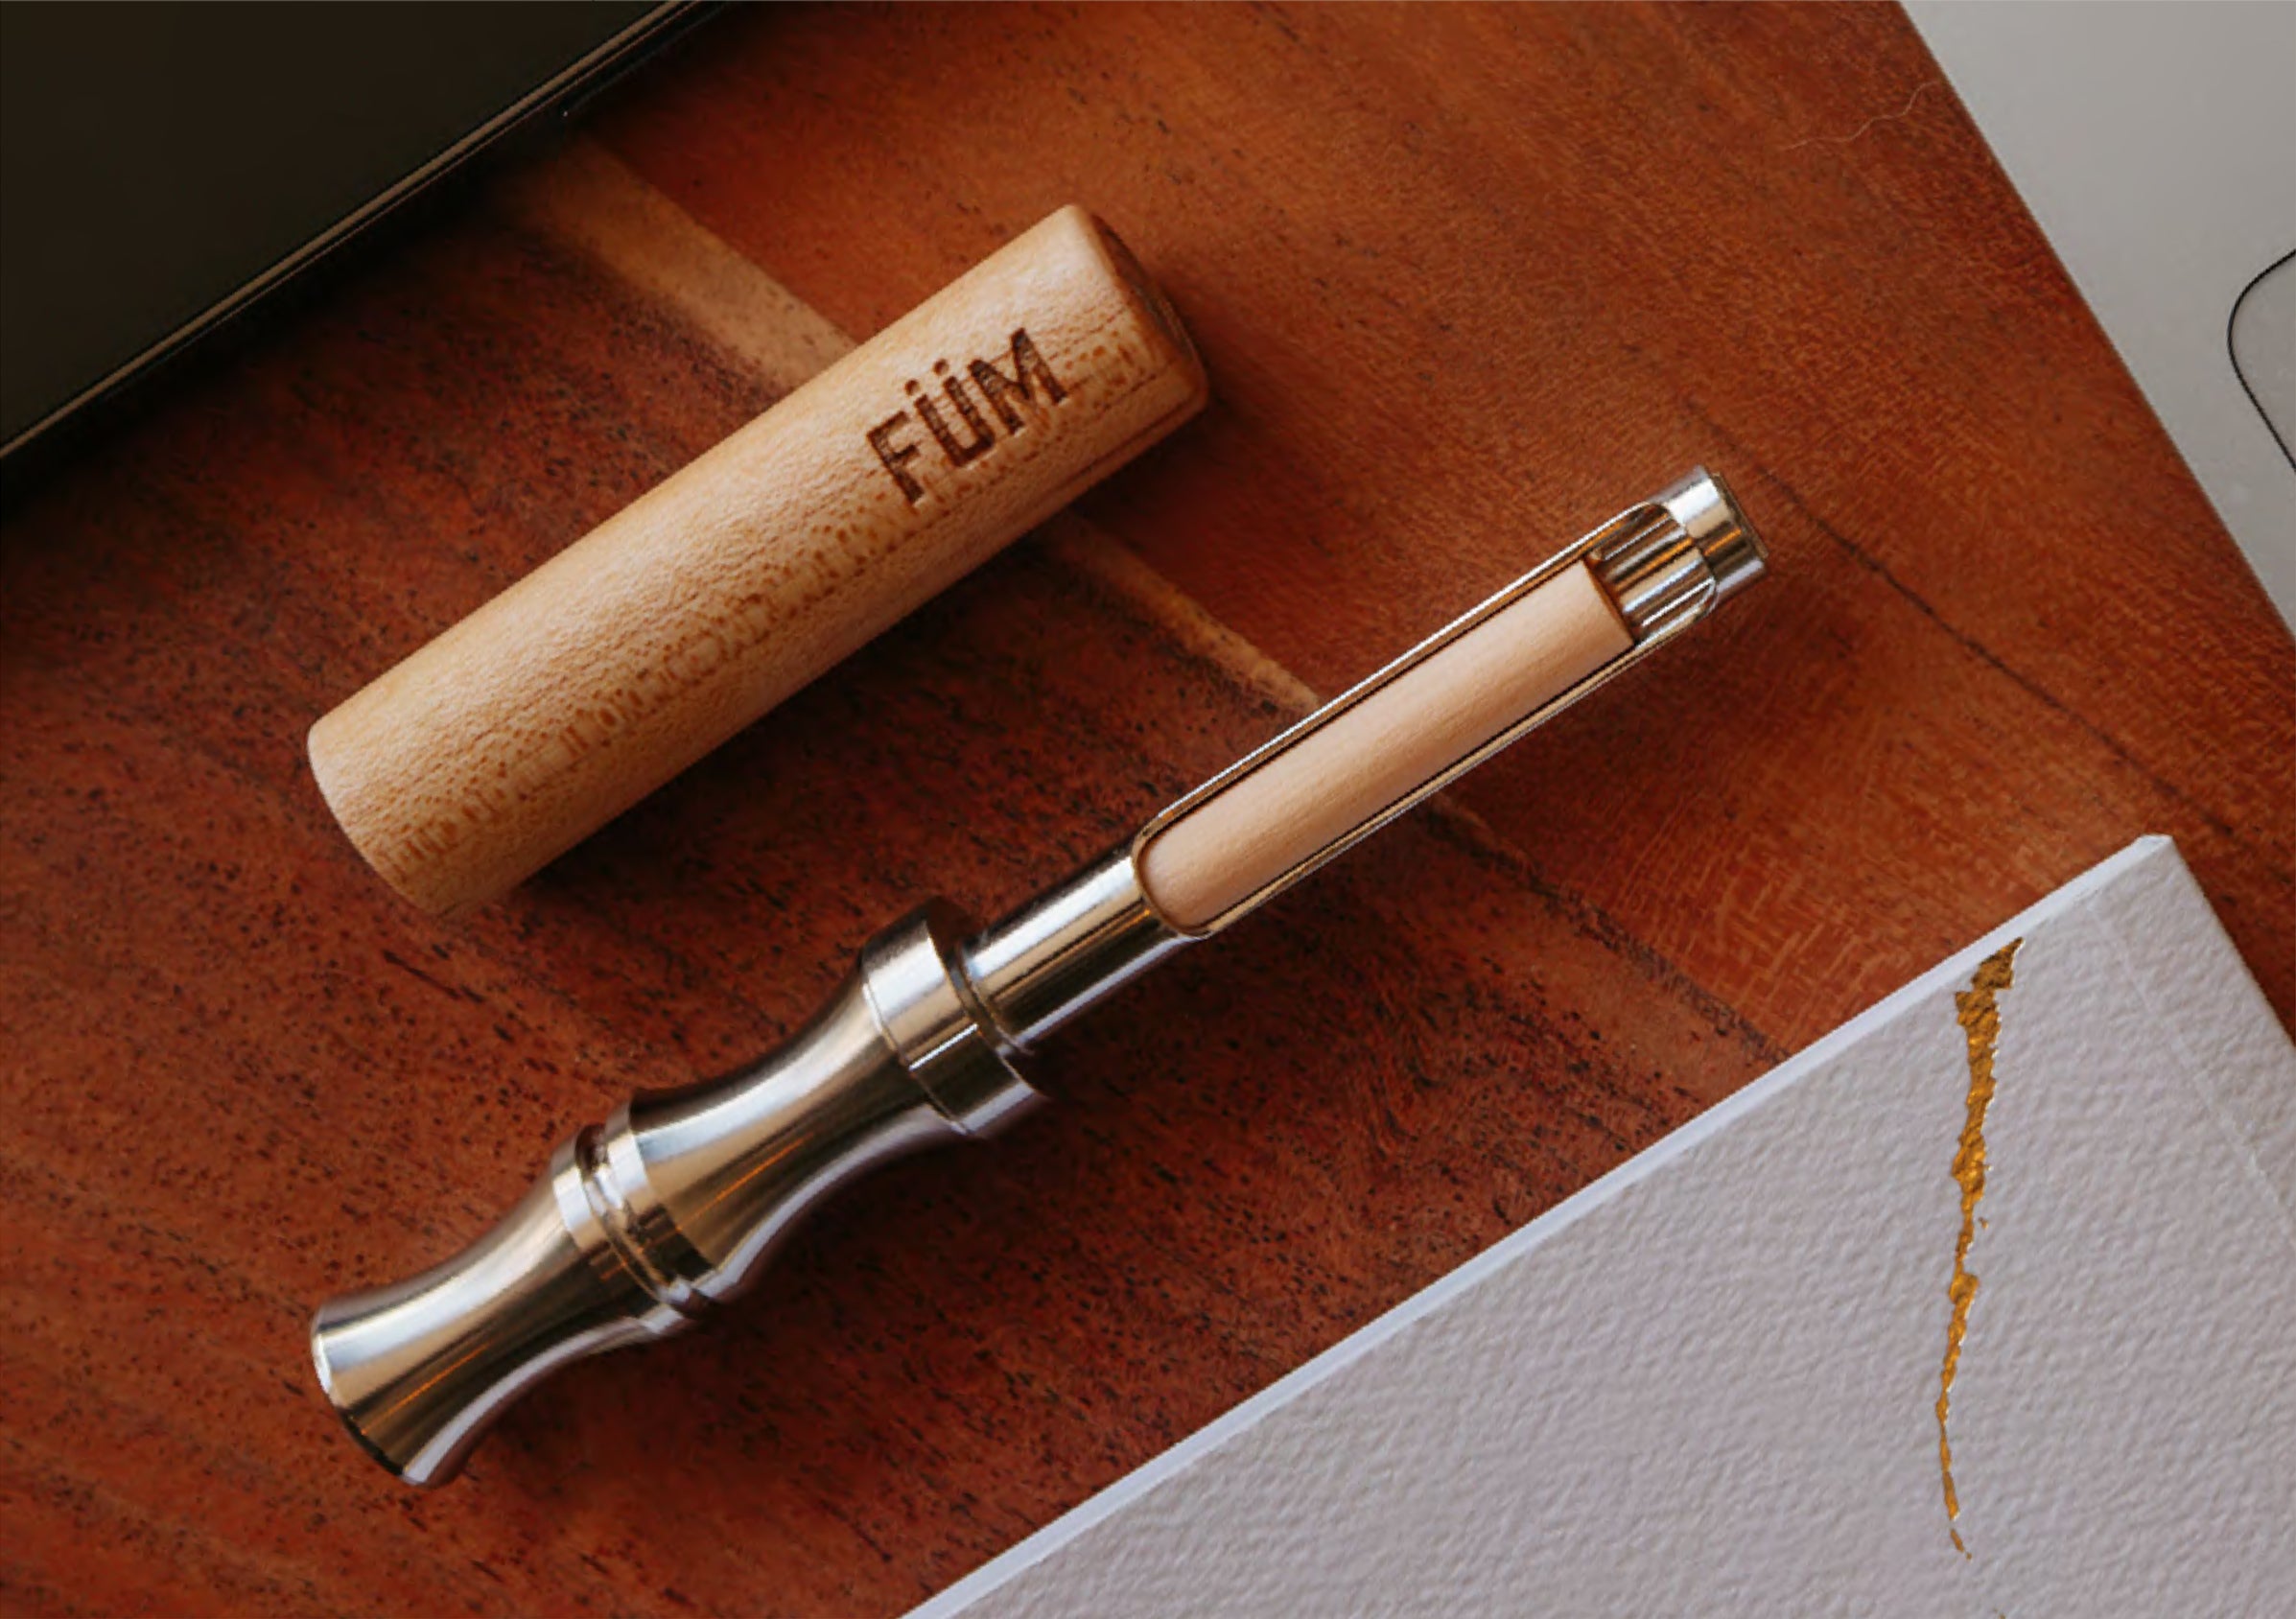 Exploring Füm: The Natural Way to Enjoy Aromatherapy On-the-Go